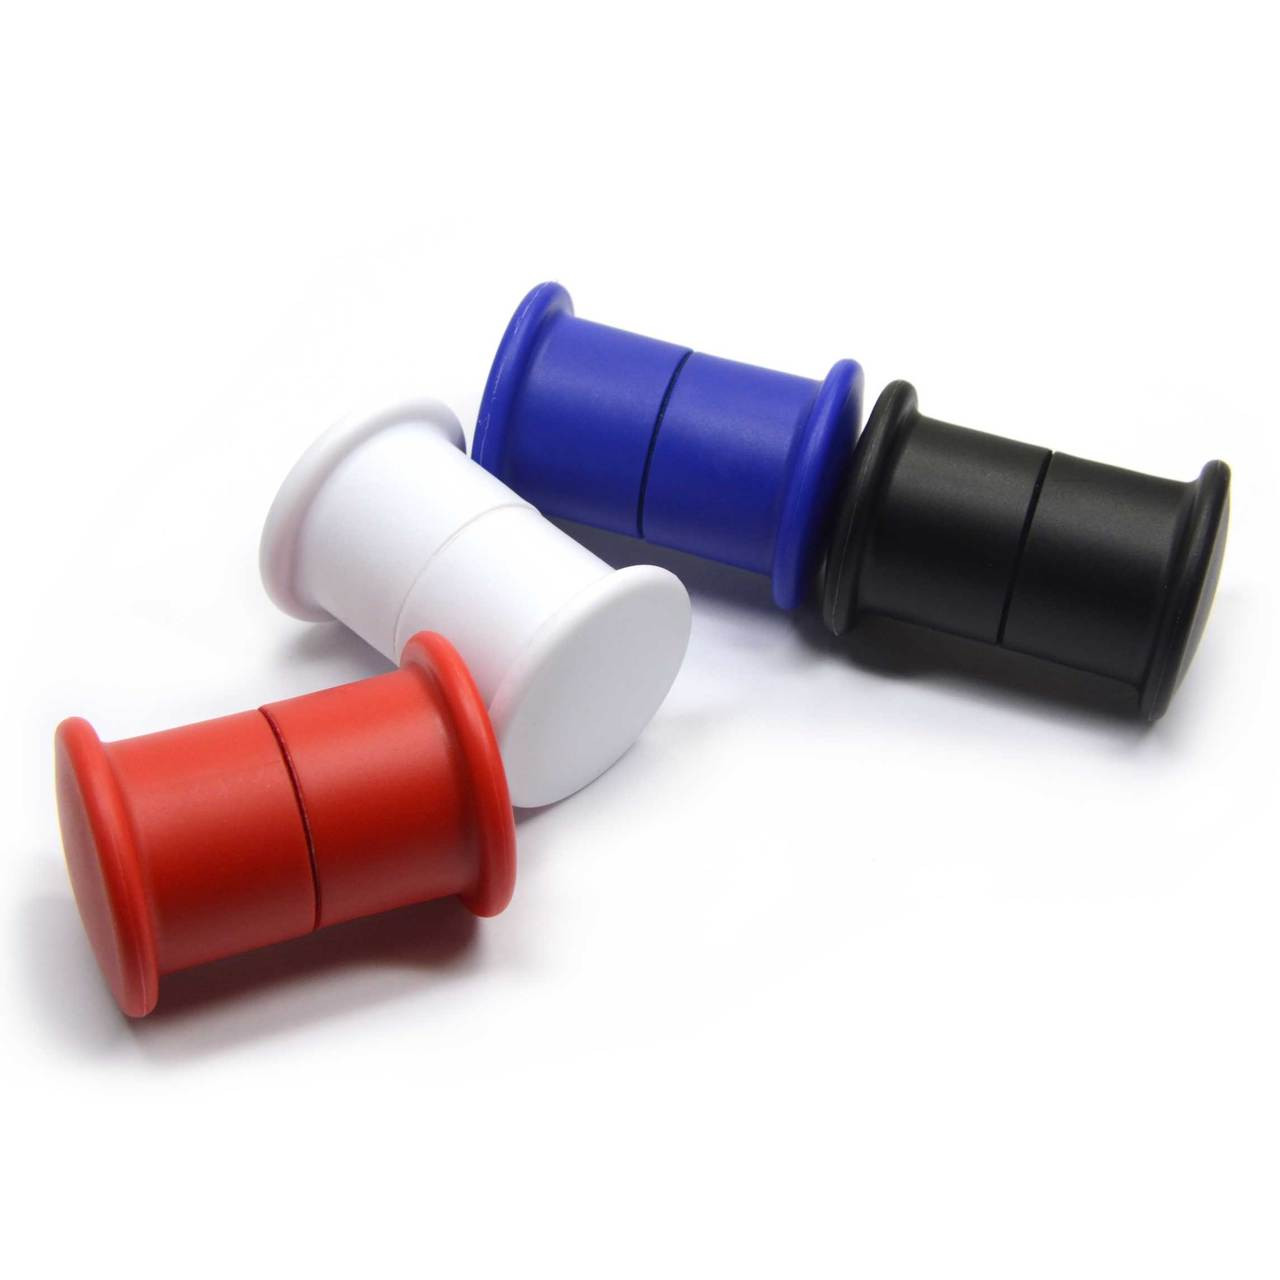 Magnetic Whiteboard Round Holders